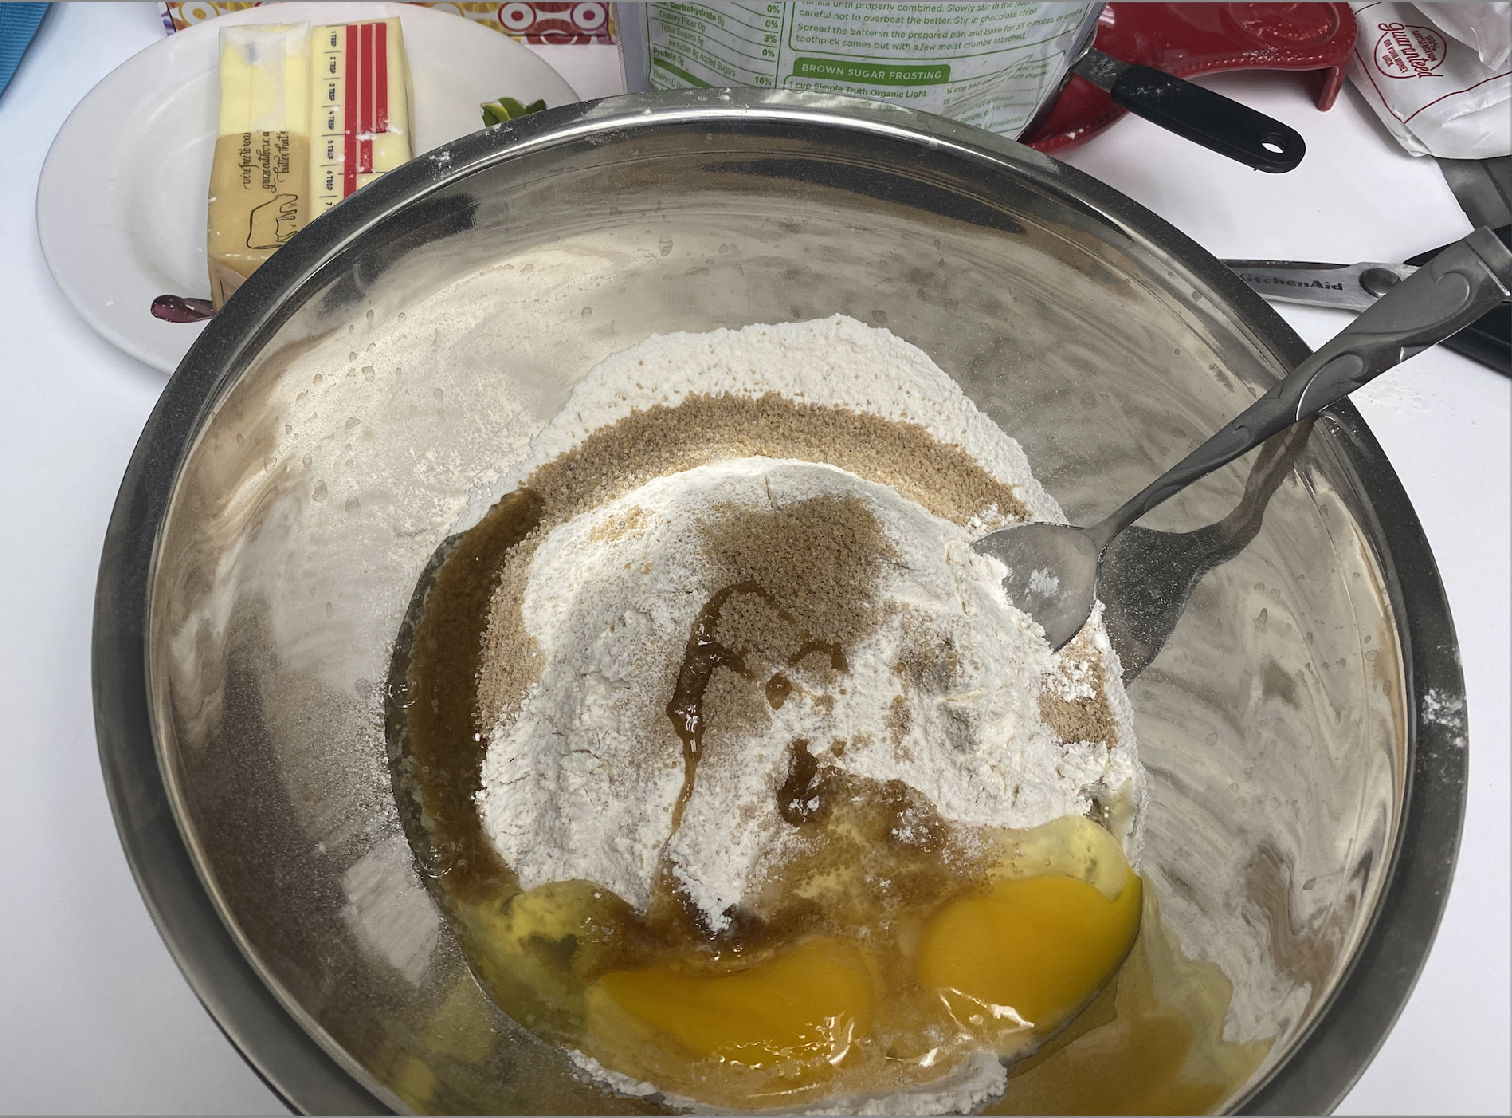 Mixing the 5-ingredient dough with a spoon